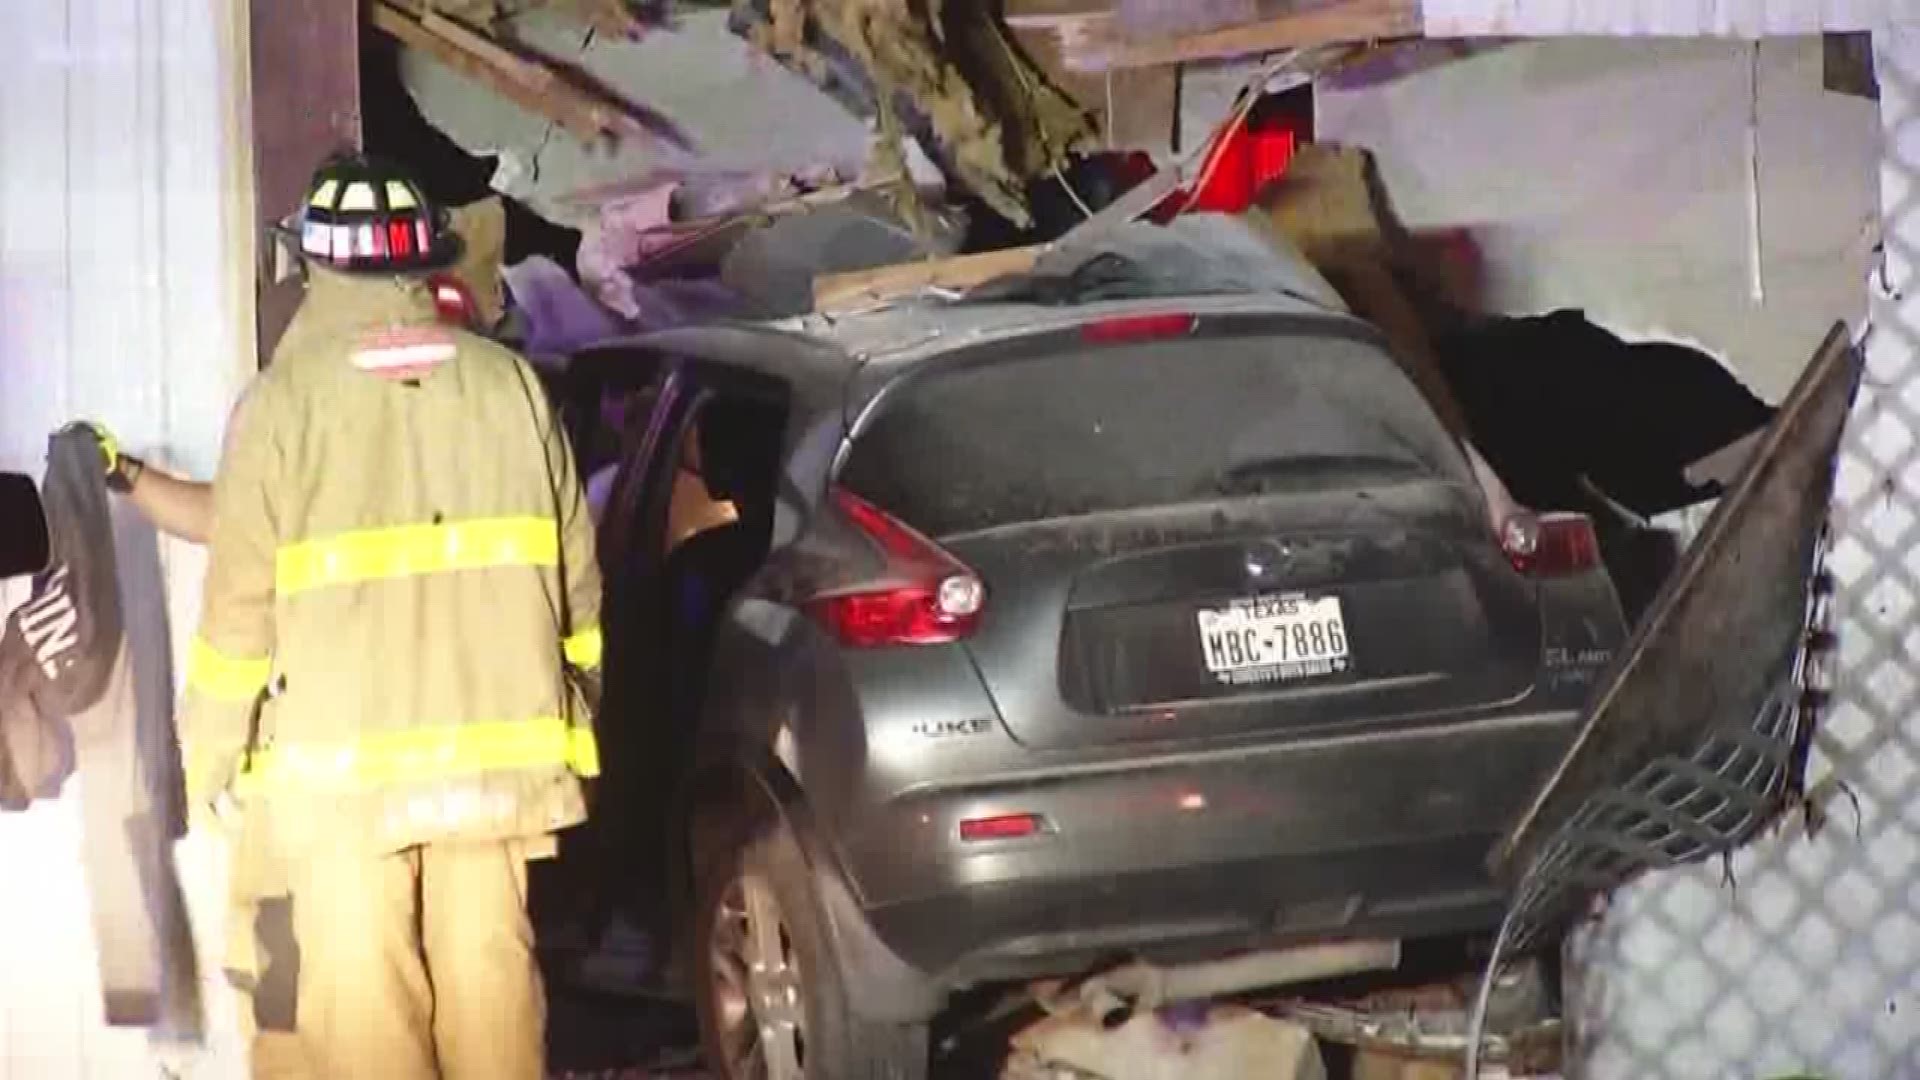 A driver plowed into a local church overnight, leaving their car and a big mess behind.